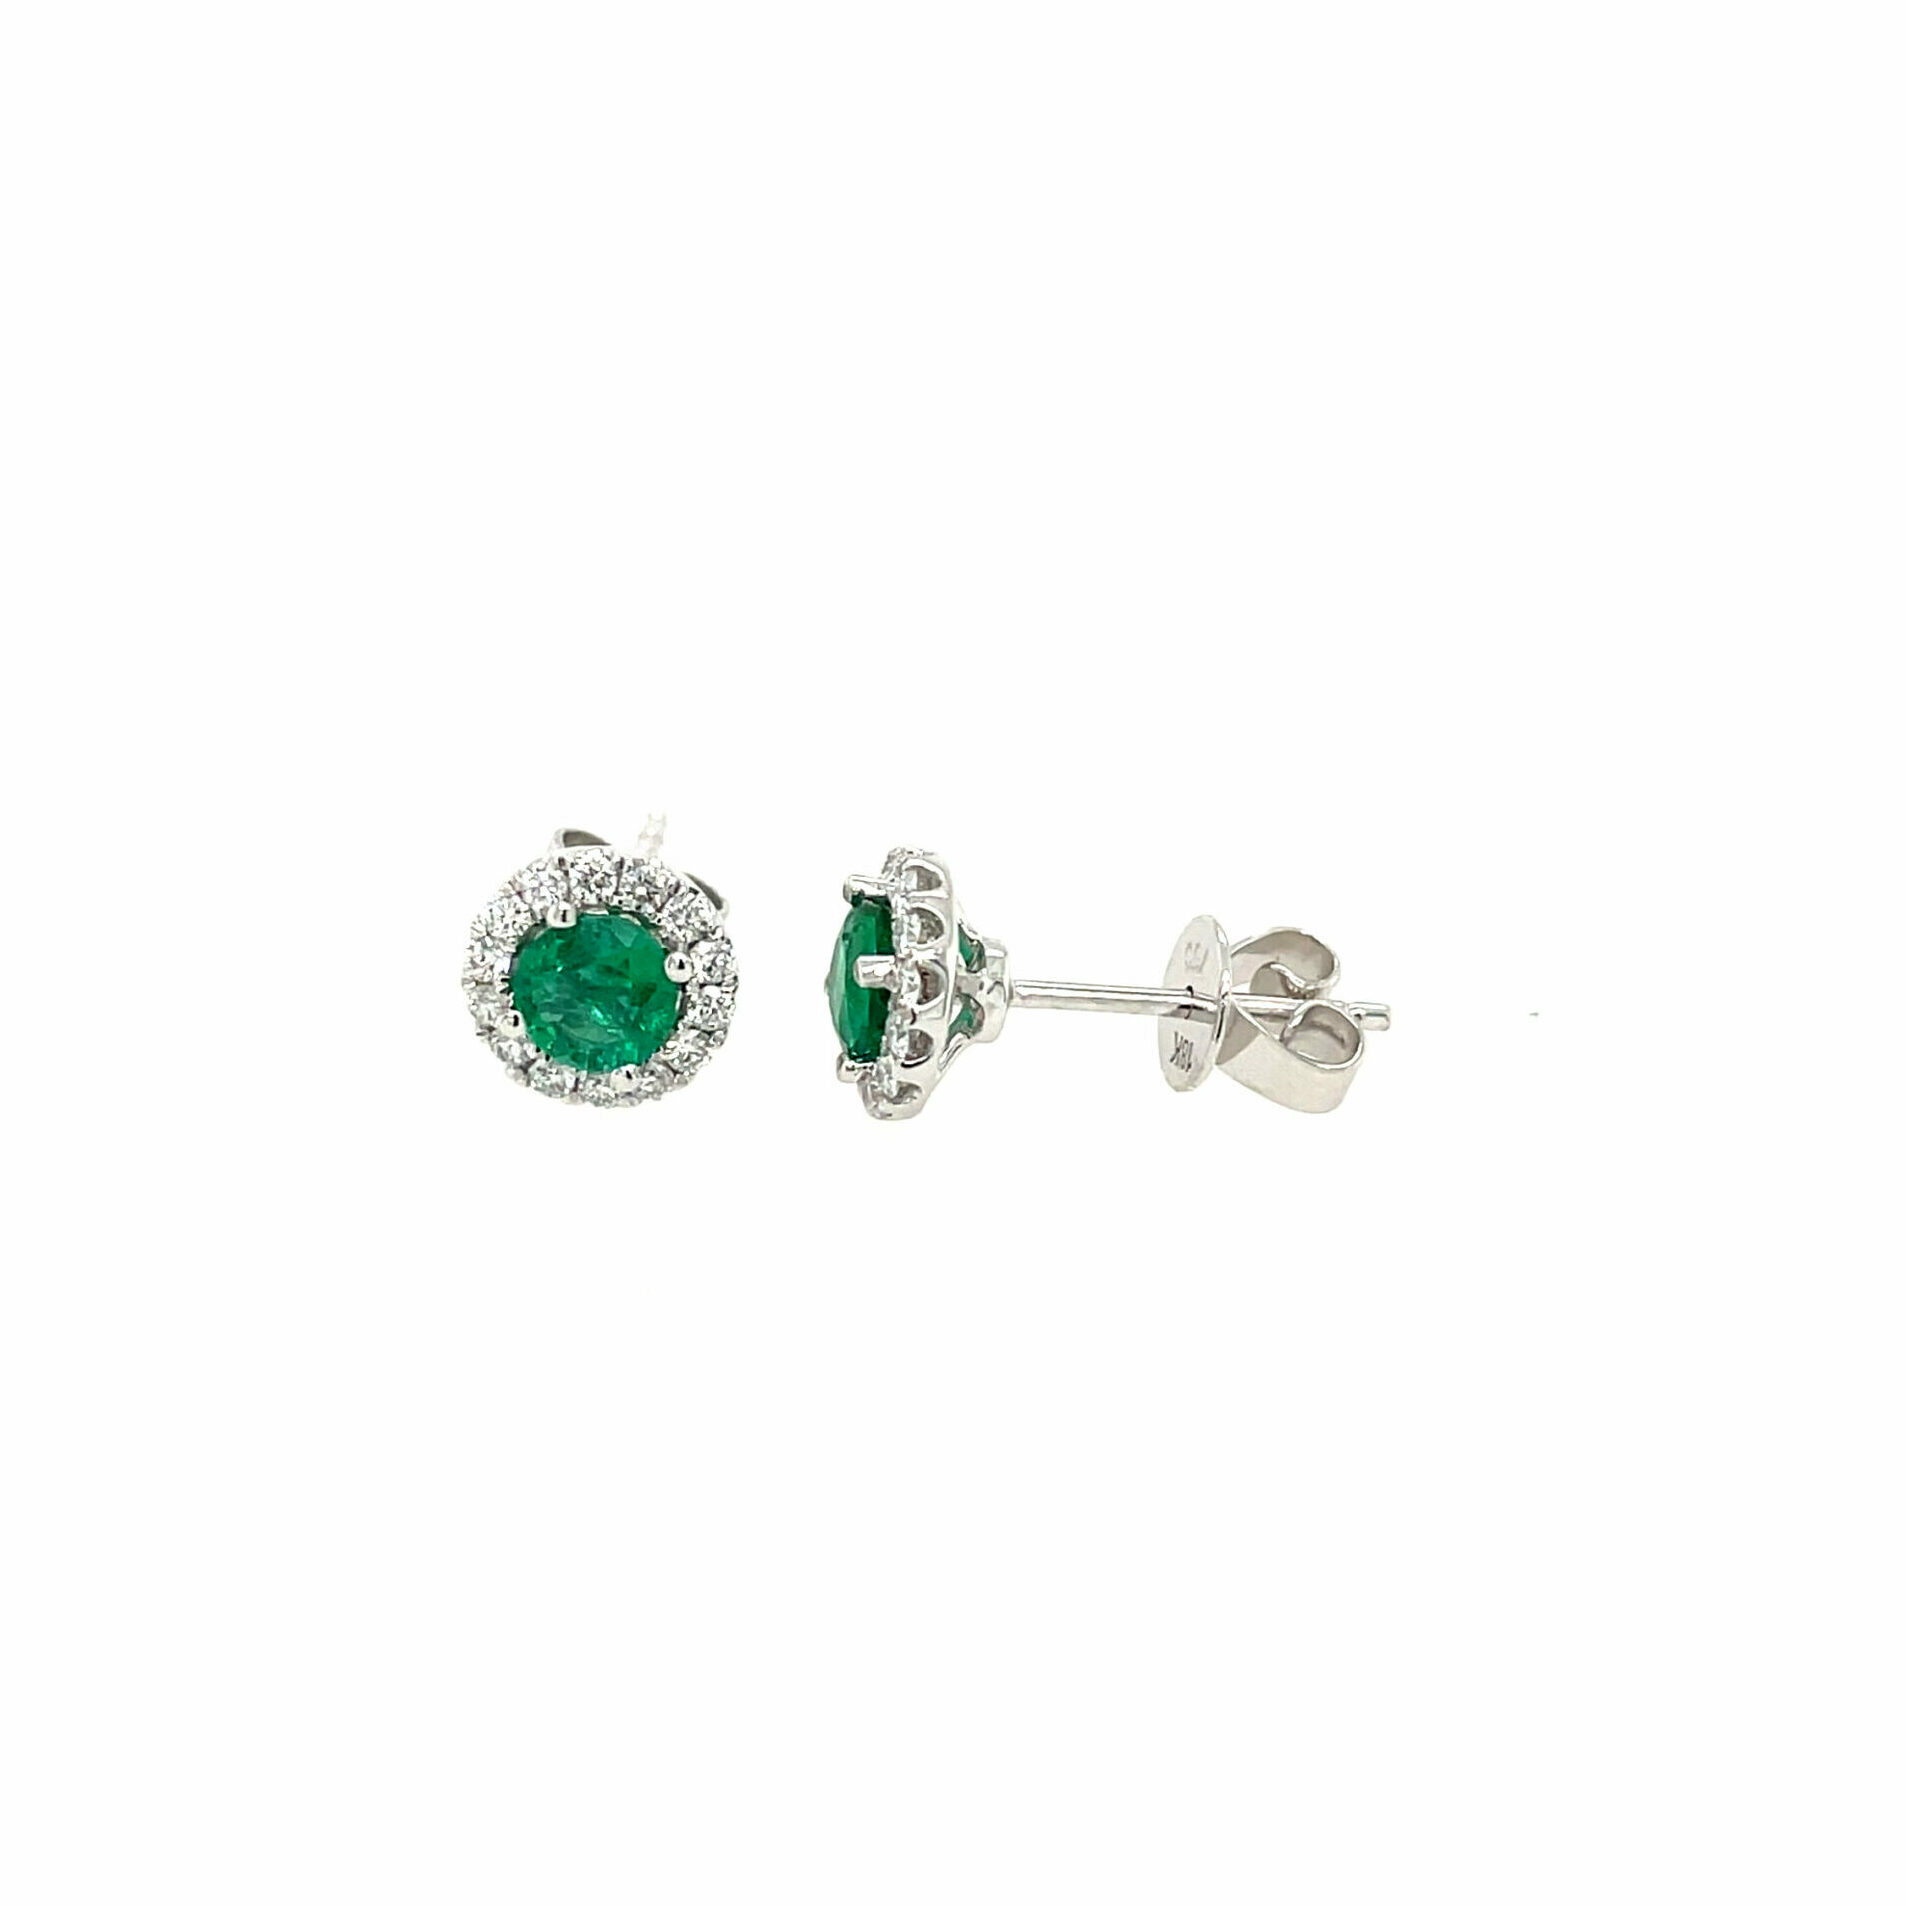 White Gold Emerald and Diamond Halo Earrings